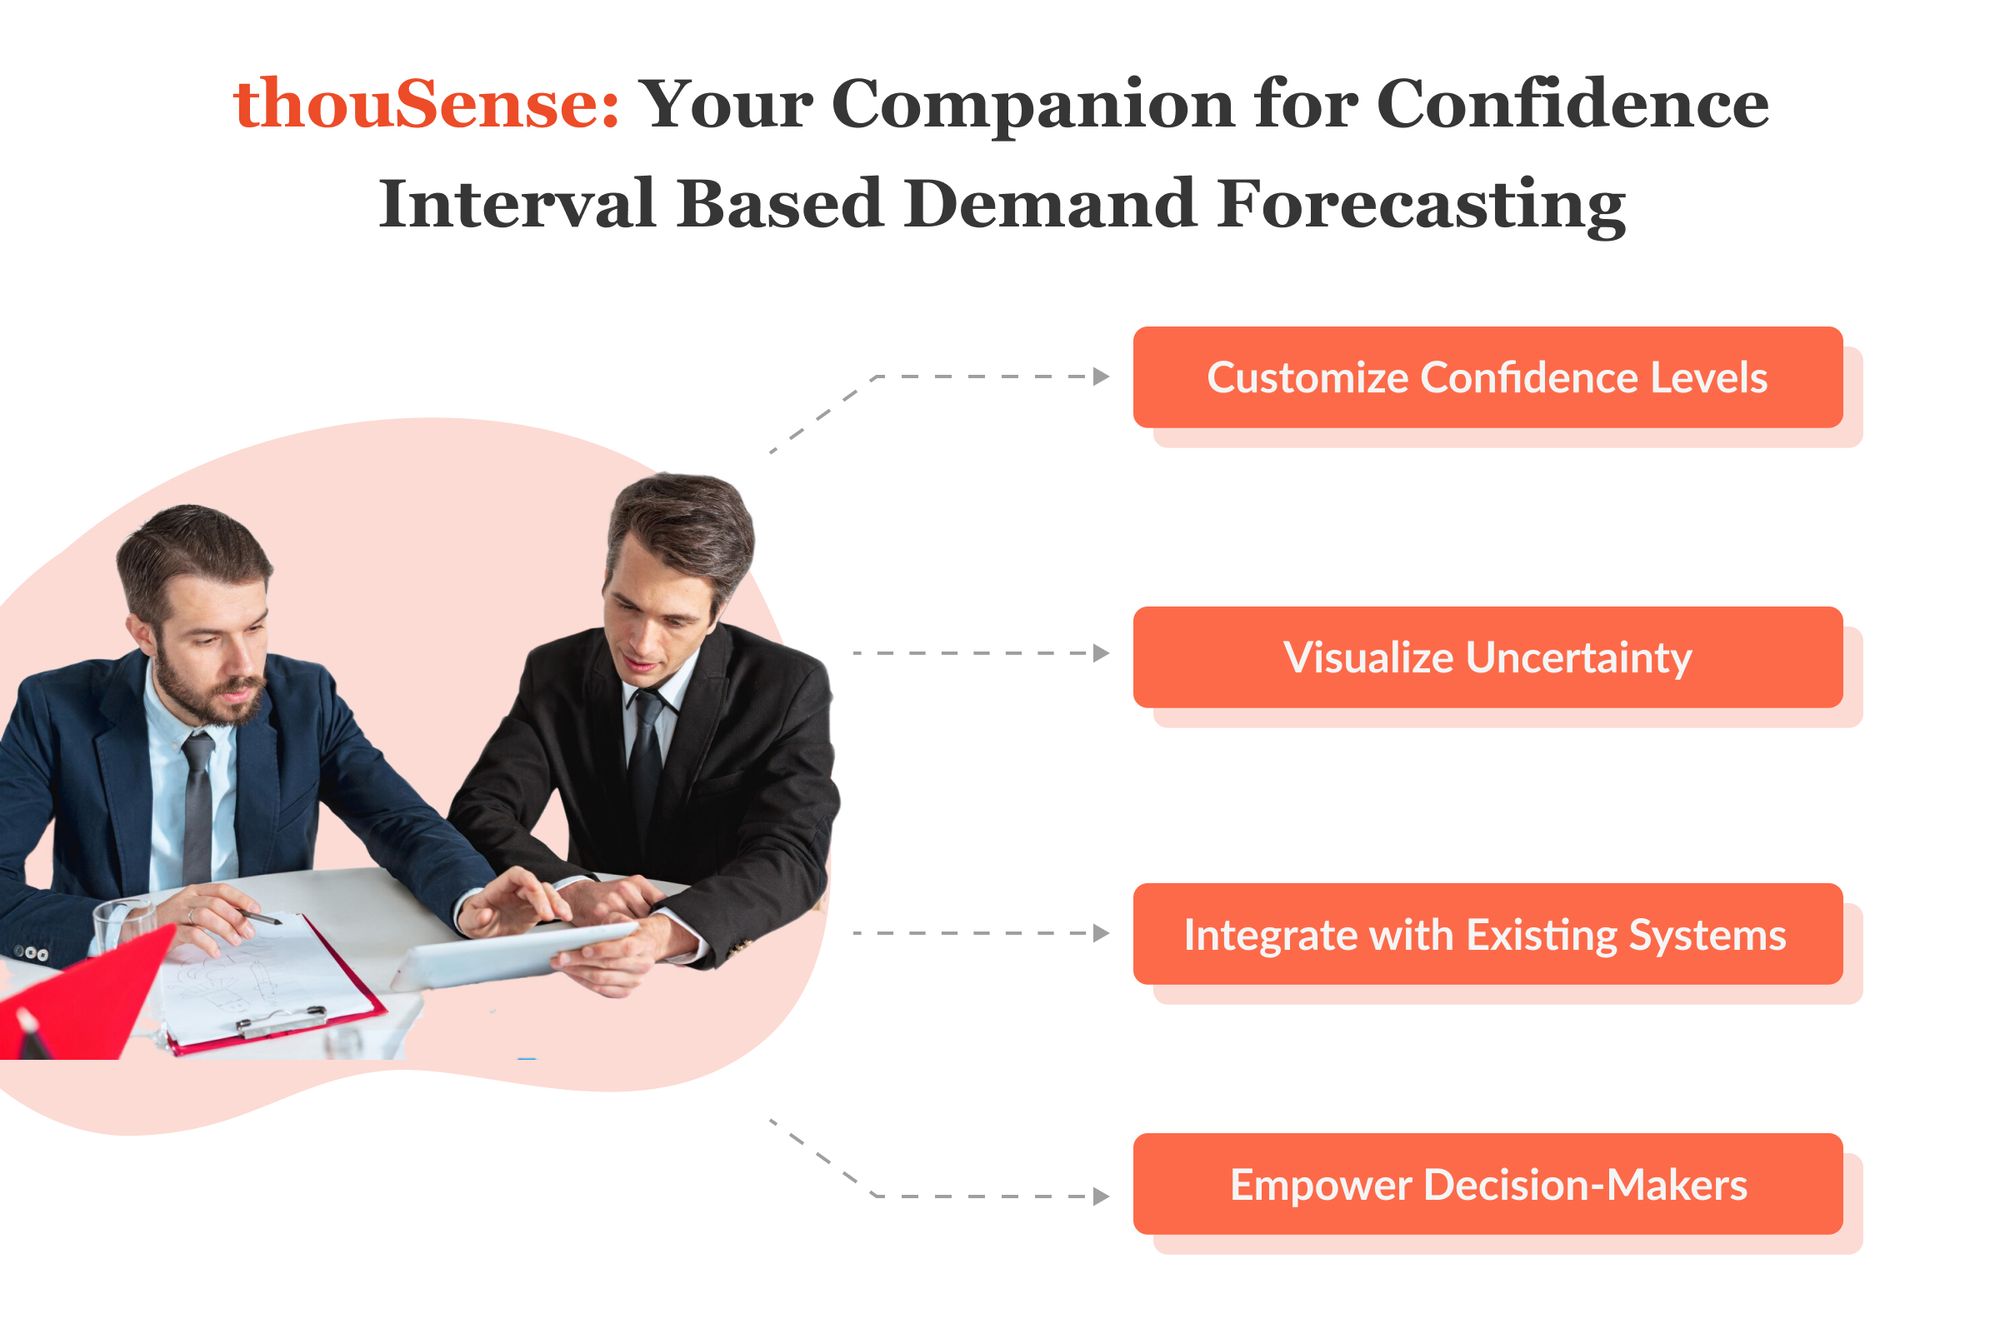 thouSense: Your Companion for Confidence Interval Based Demand Forecasting